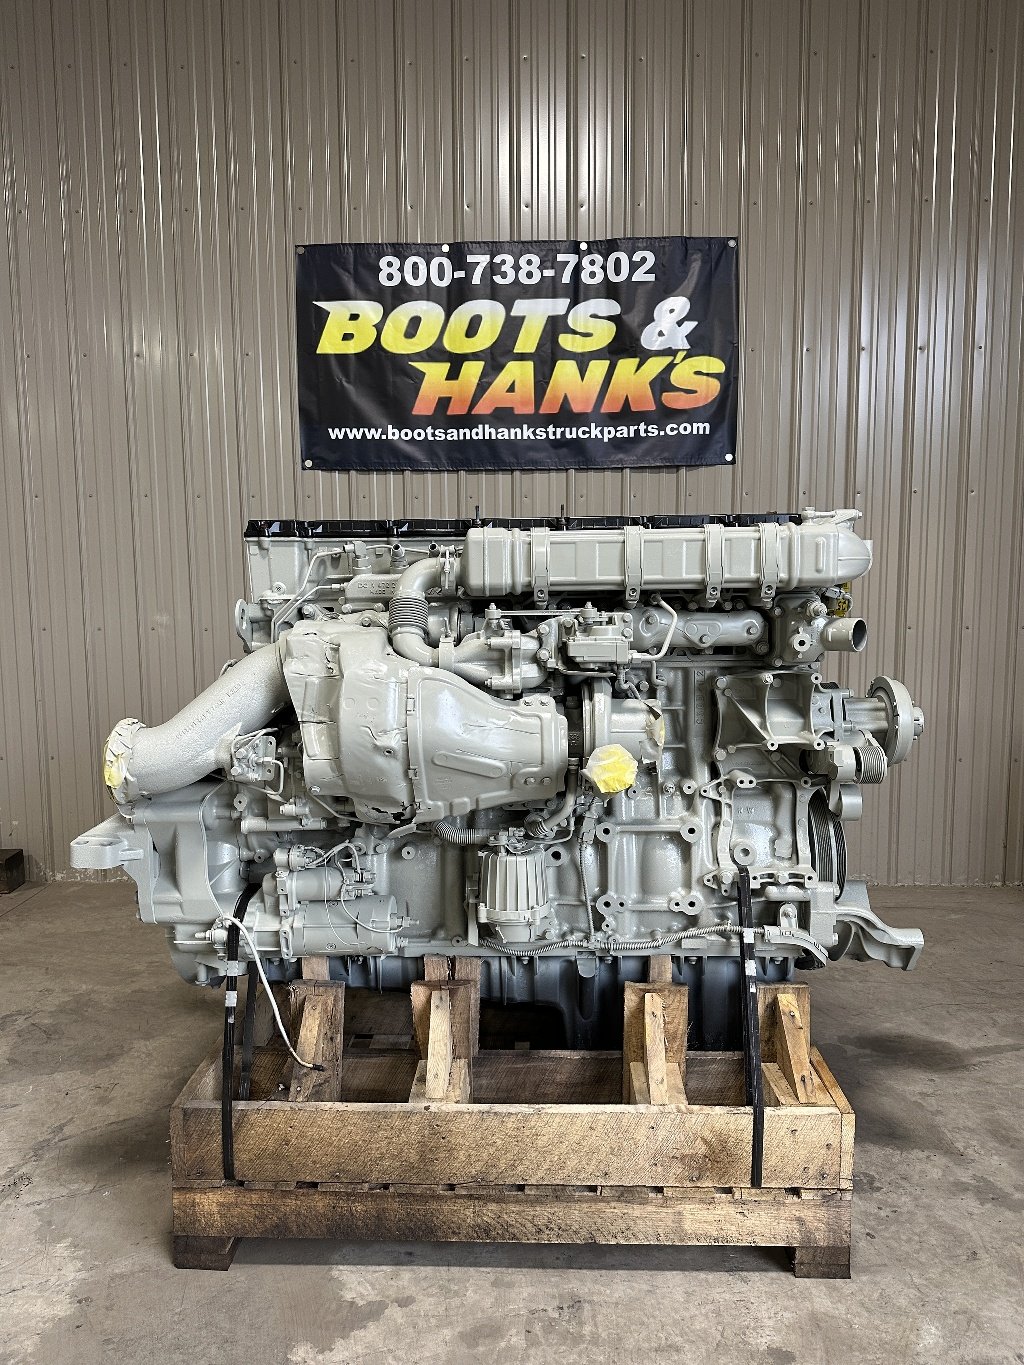 USED 2012 DETROIT DD15 COMPLETE ENGINE TRUCK PARTS #1957